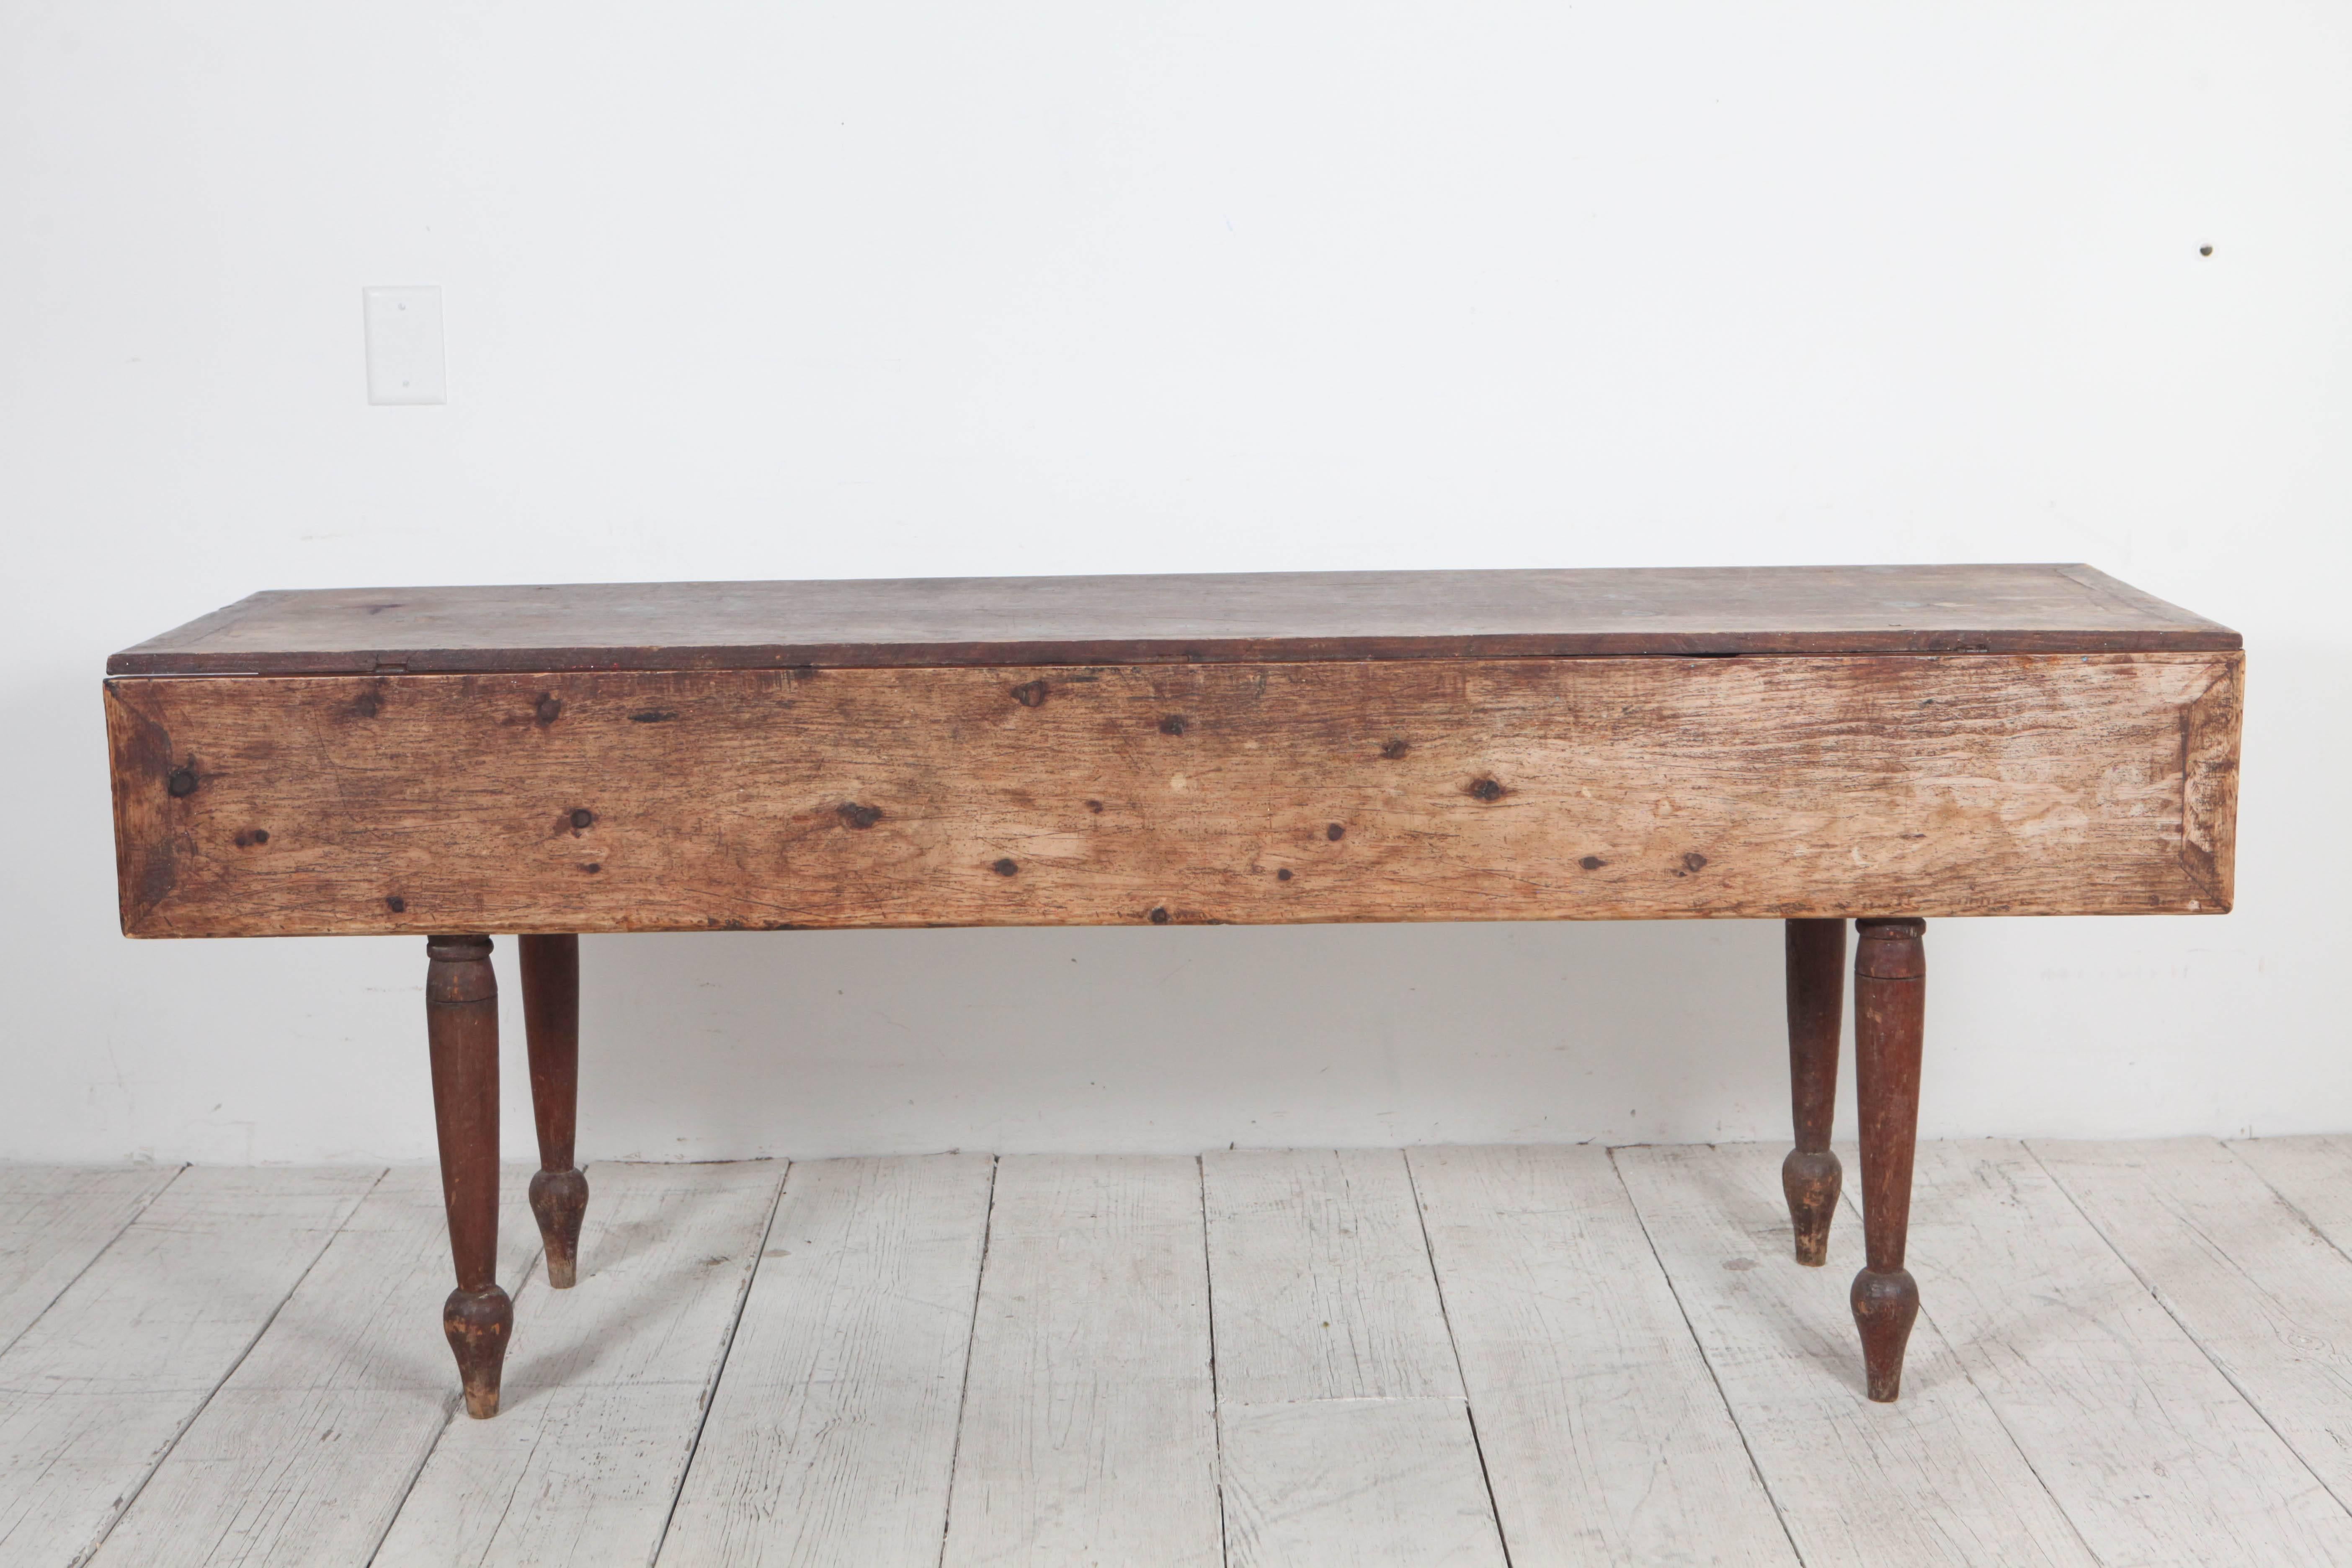 Farm style drop-leaf table or console. When closed table measures 72